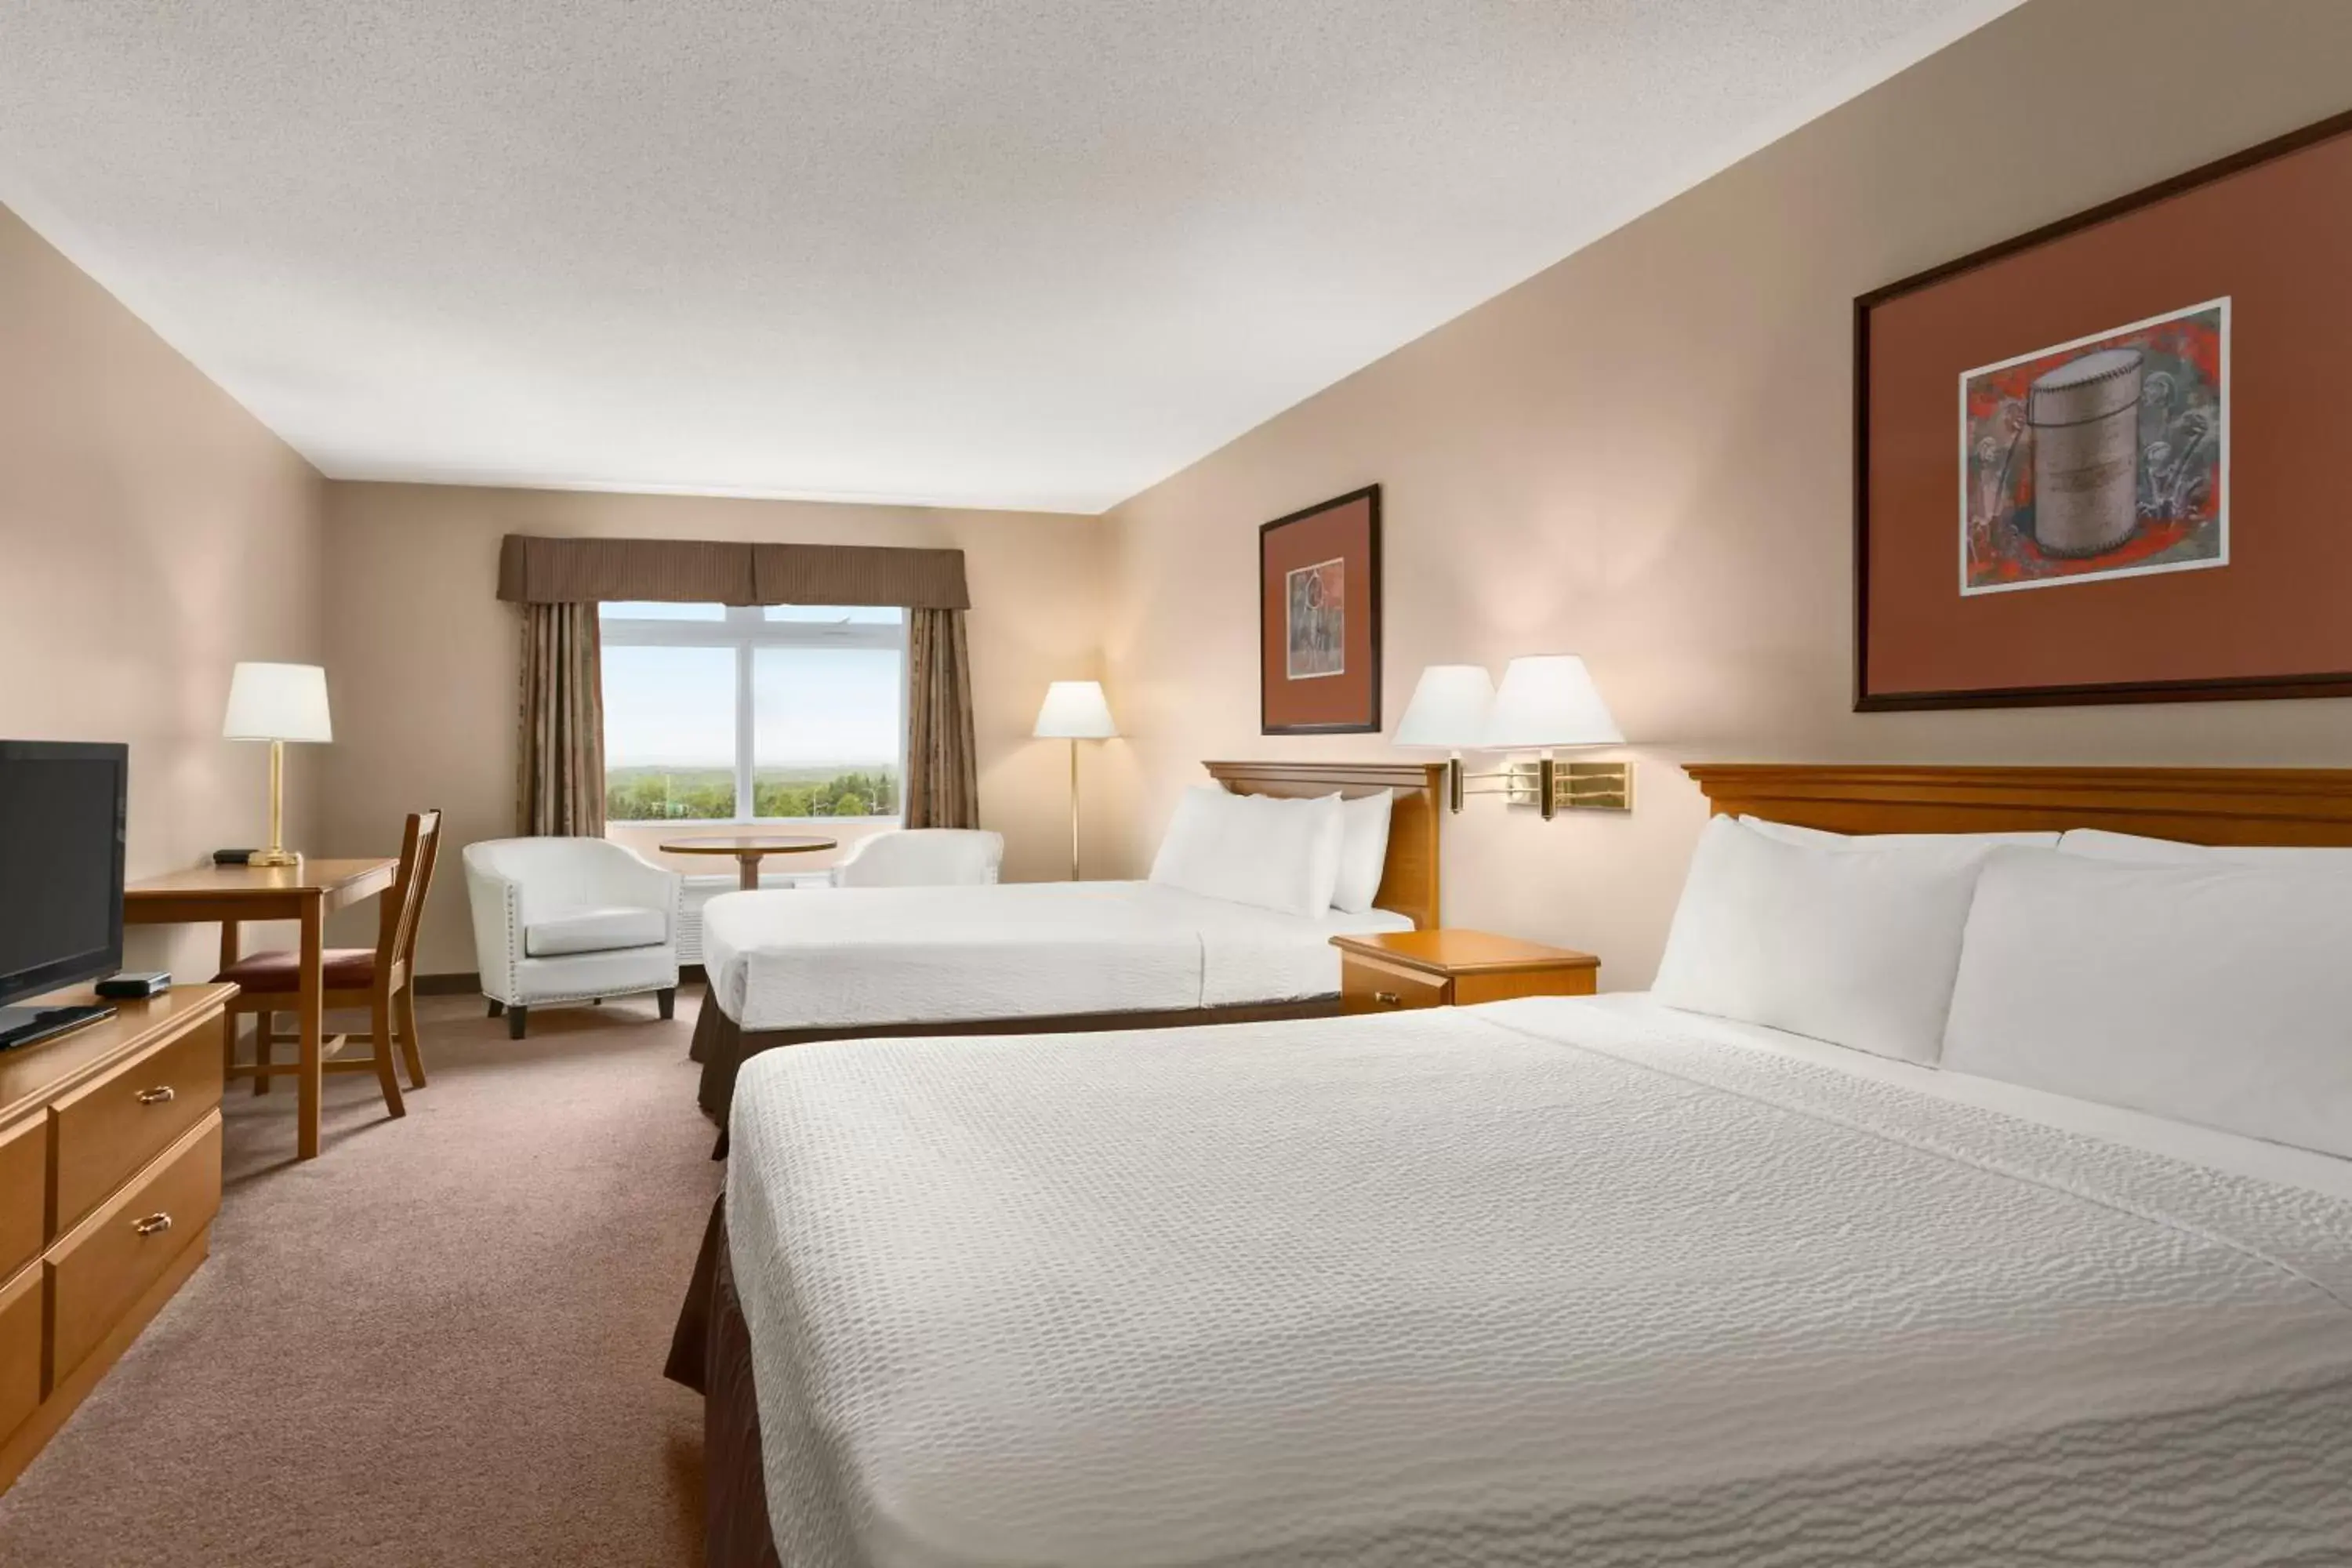 Bedroom, Room Photo in Days Inn by Wyndham Oromocto Conference Centre